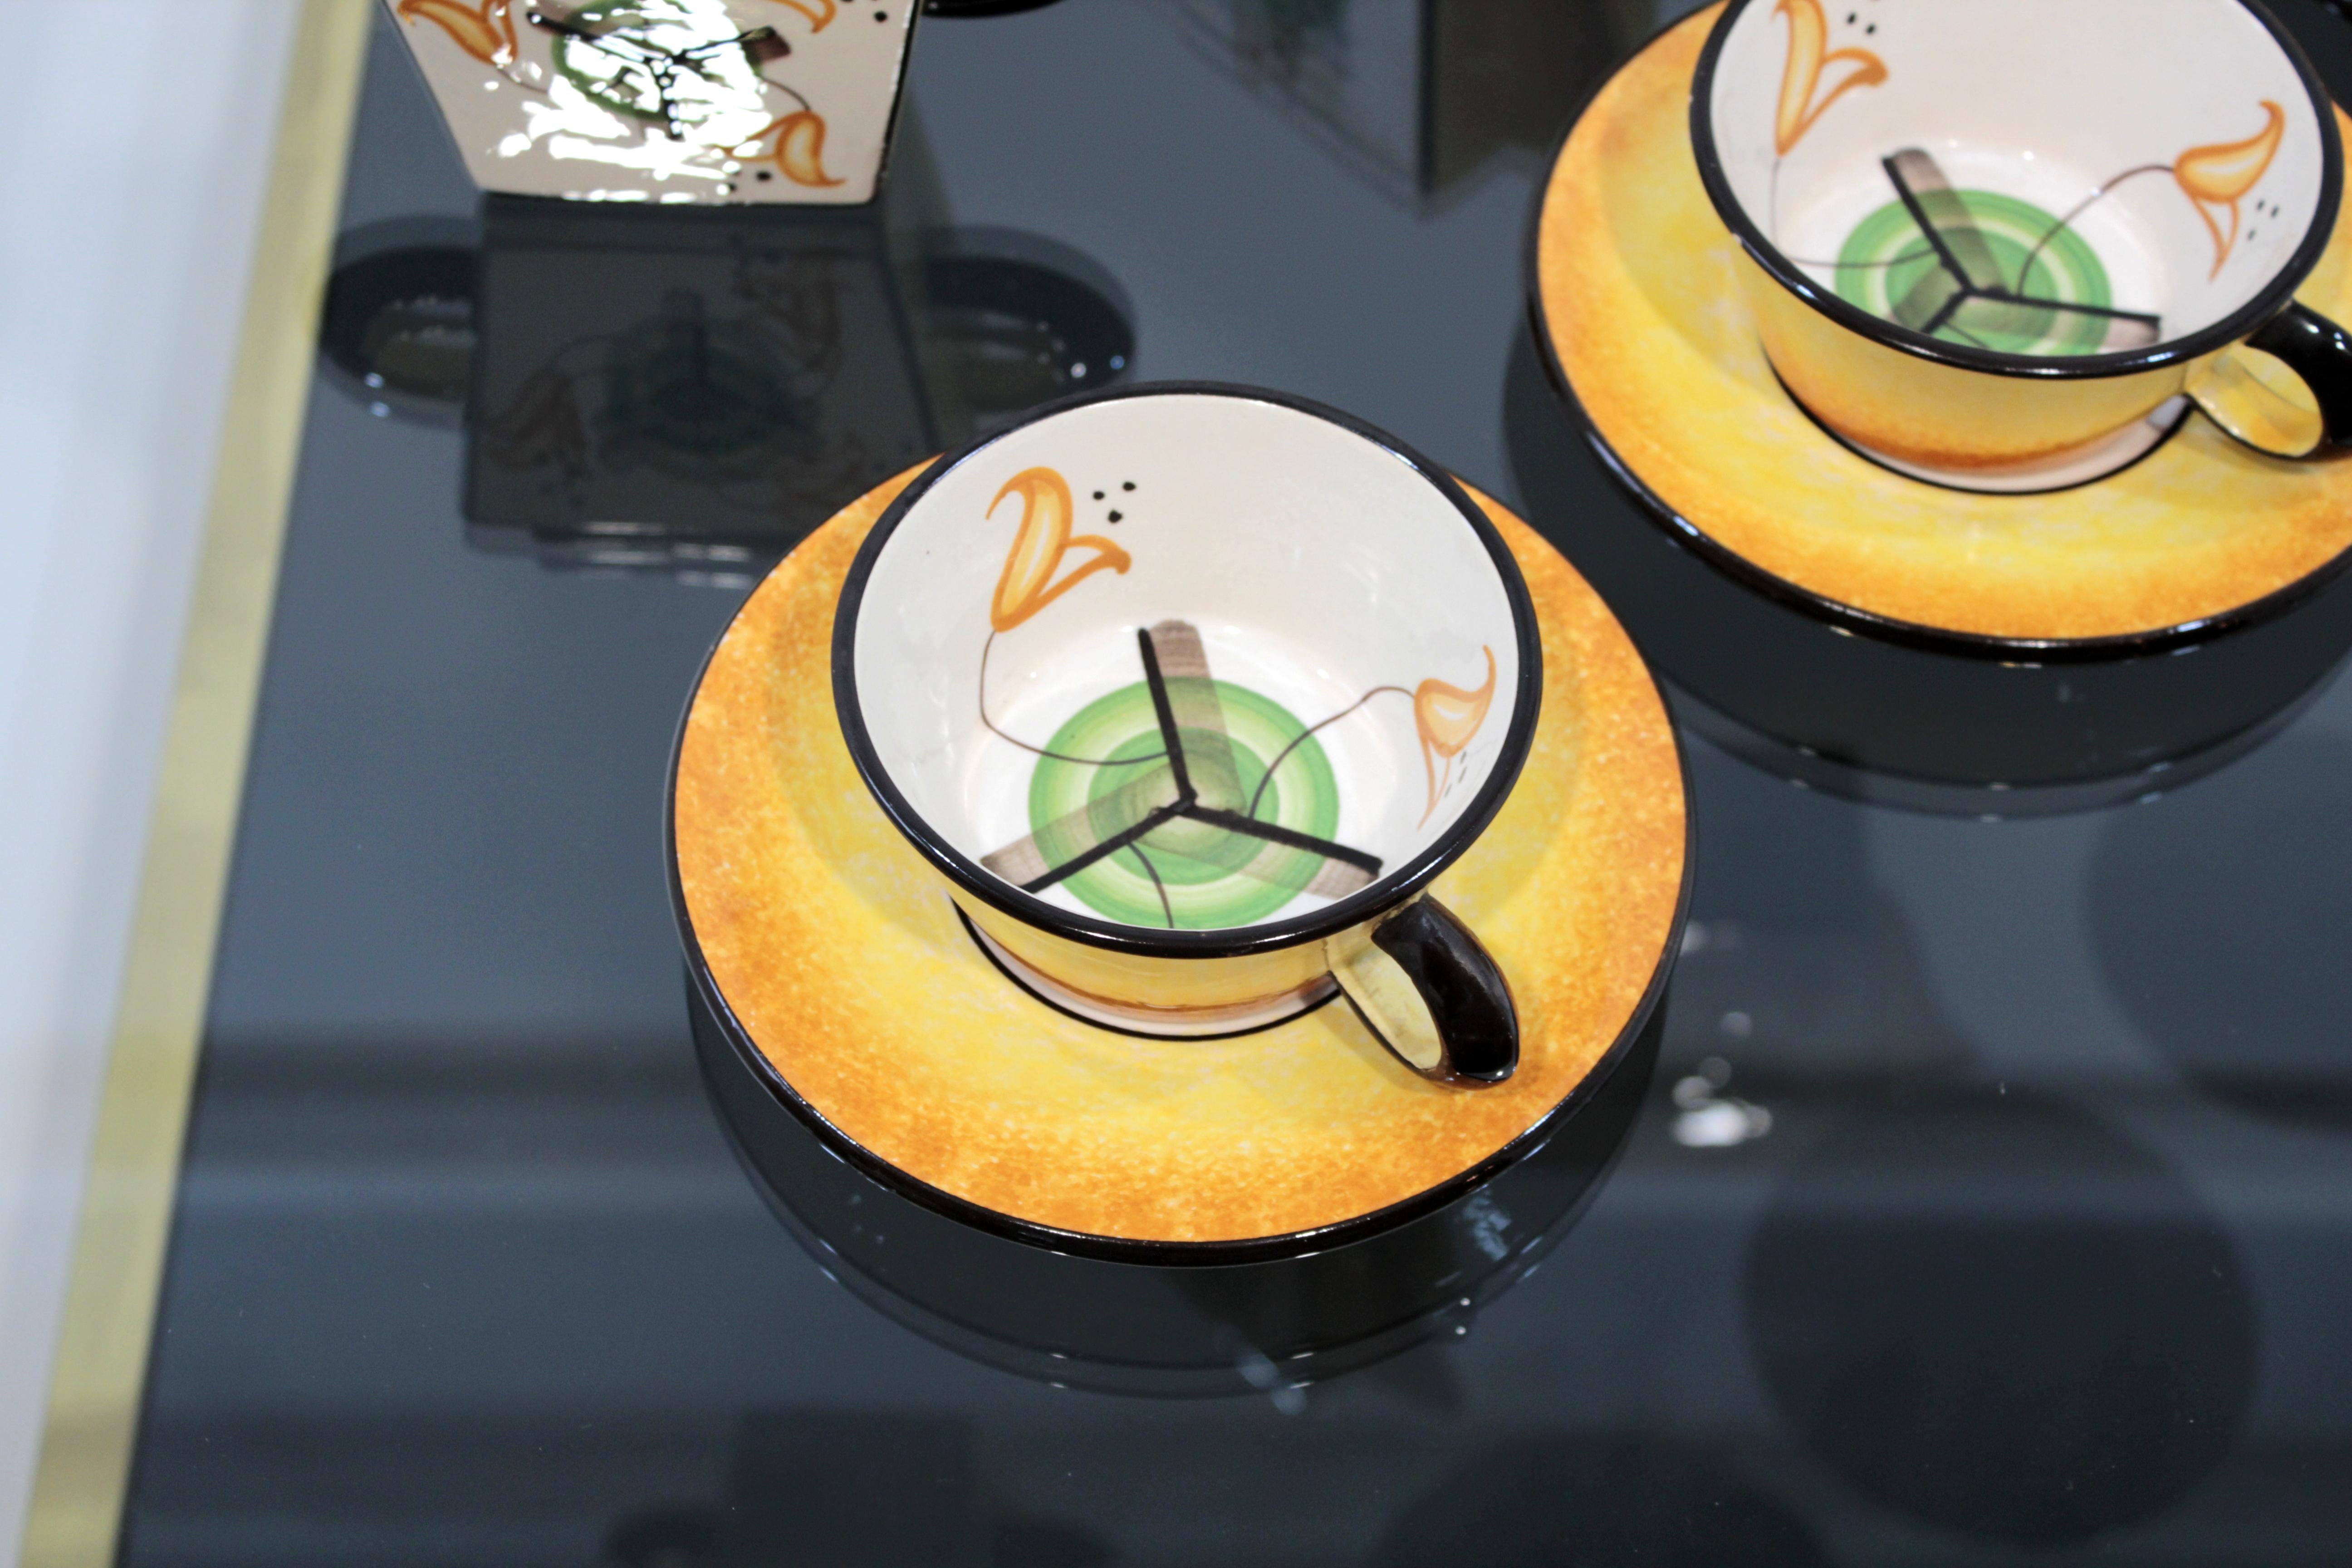 Set of 1930s futurist style hand-painted ceramic Barraud, Messeri & C. tea service or coffee service.

The group is composed by seven pieces among which there are:
- 4 cups
- 1 sugar bowl
- 1 milk jug
- 1 teapot

Below the cup you can read